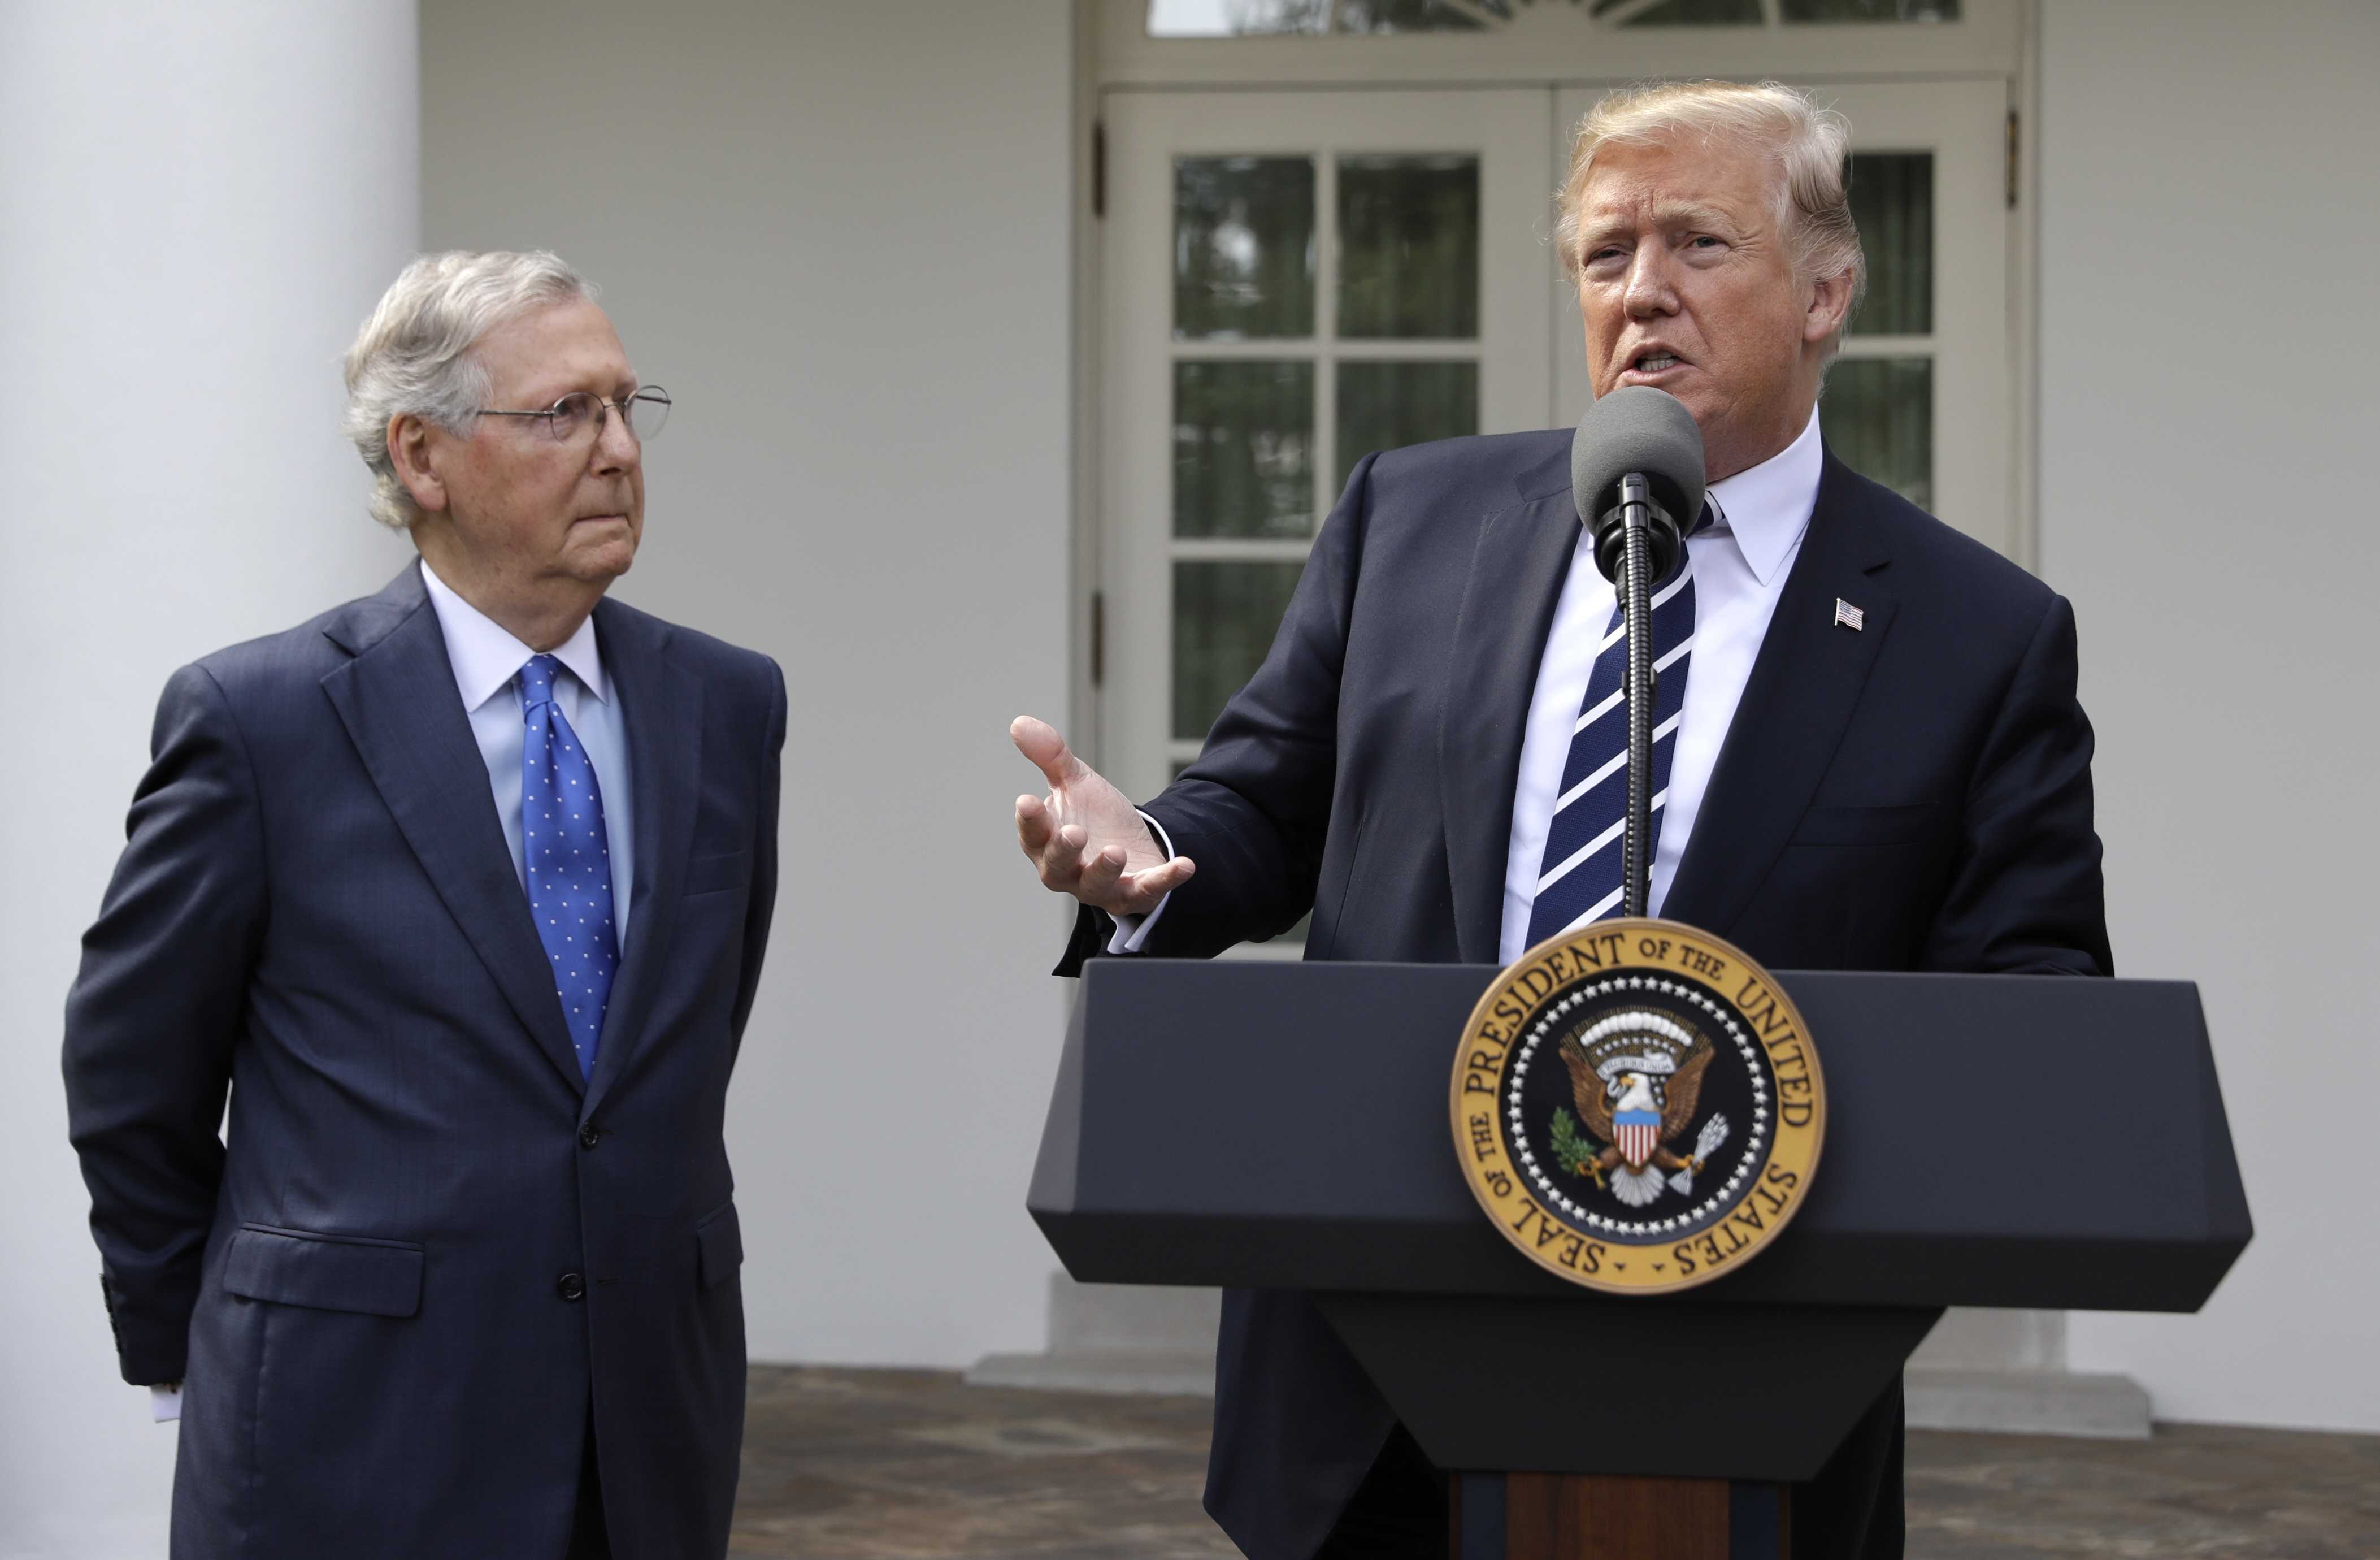 Despite past criticism, Trump says he and McConnell are 'closer than ever before’